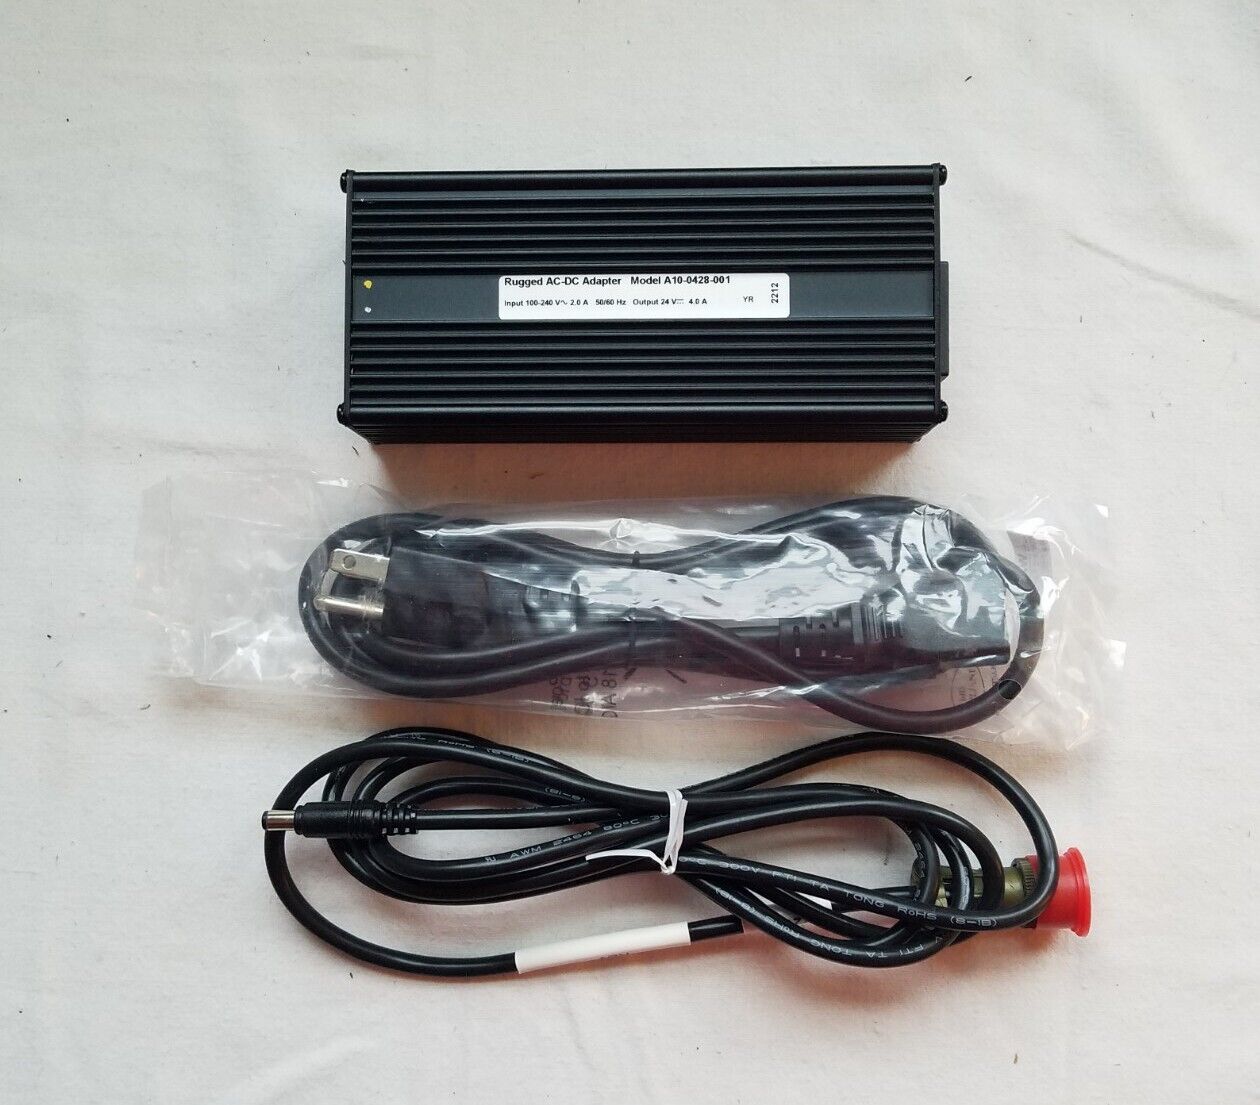 Rugged AC-DC Adapter 24 VDC 4.0 A - US Seller